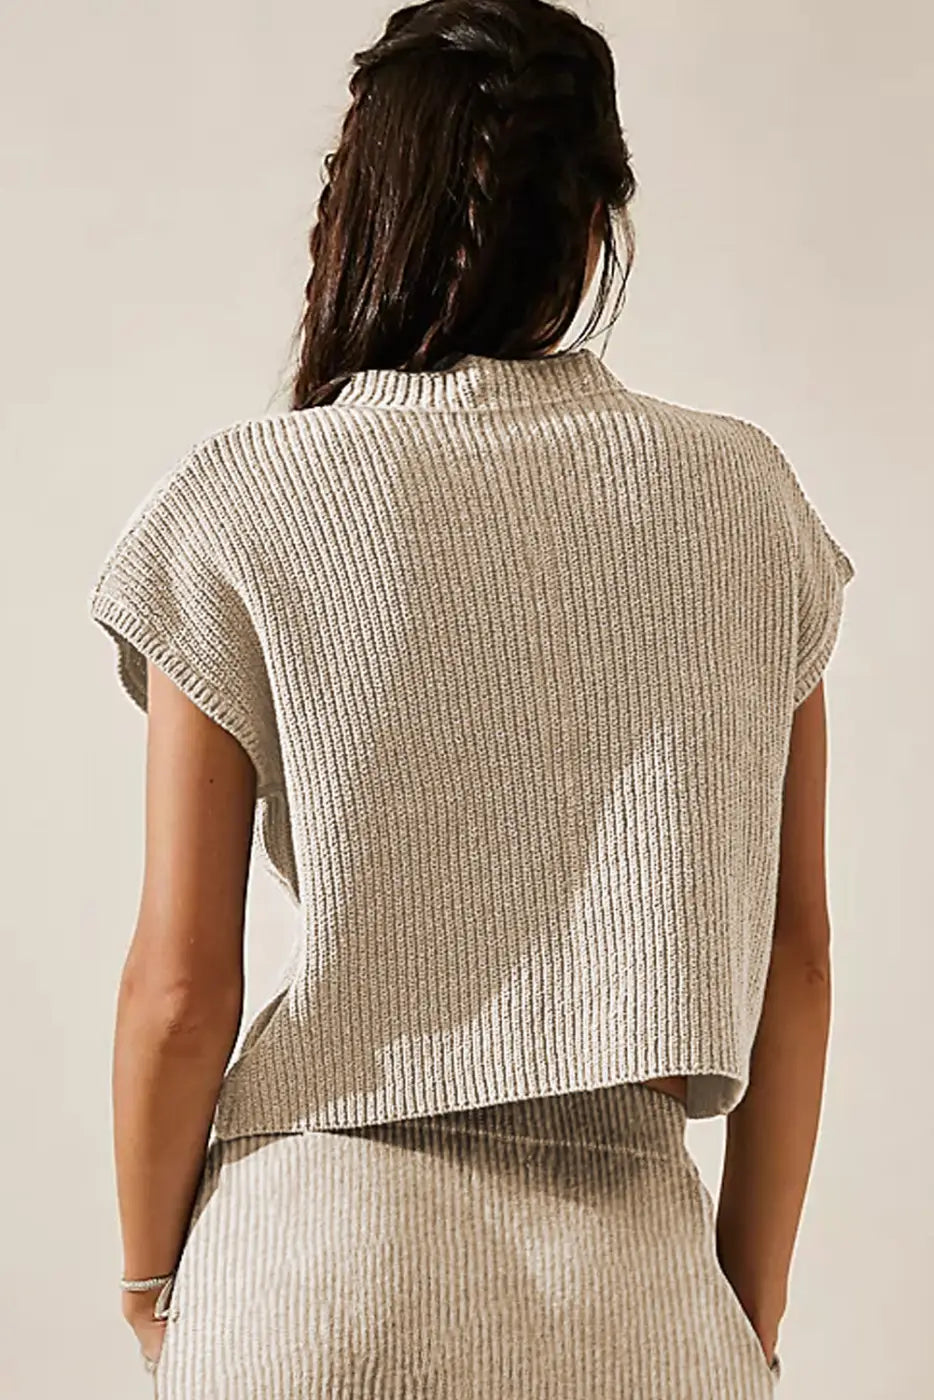 Apricot v-neck sweater - ribbed cap sleeve - sweaters